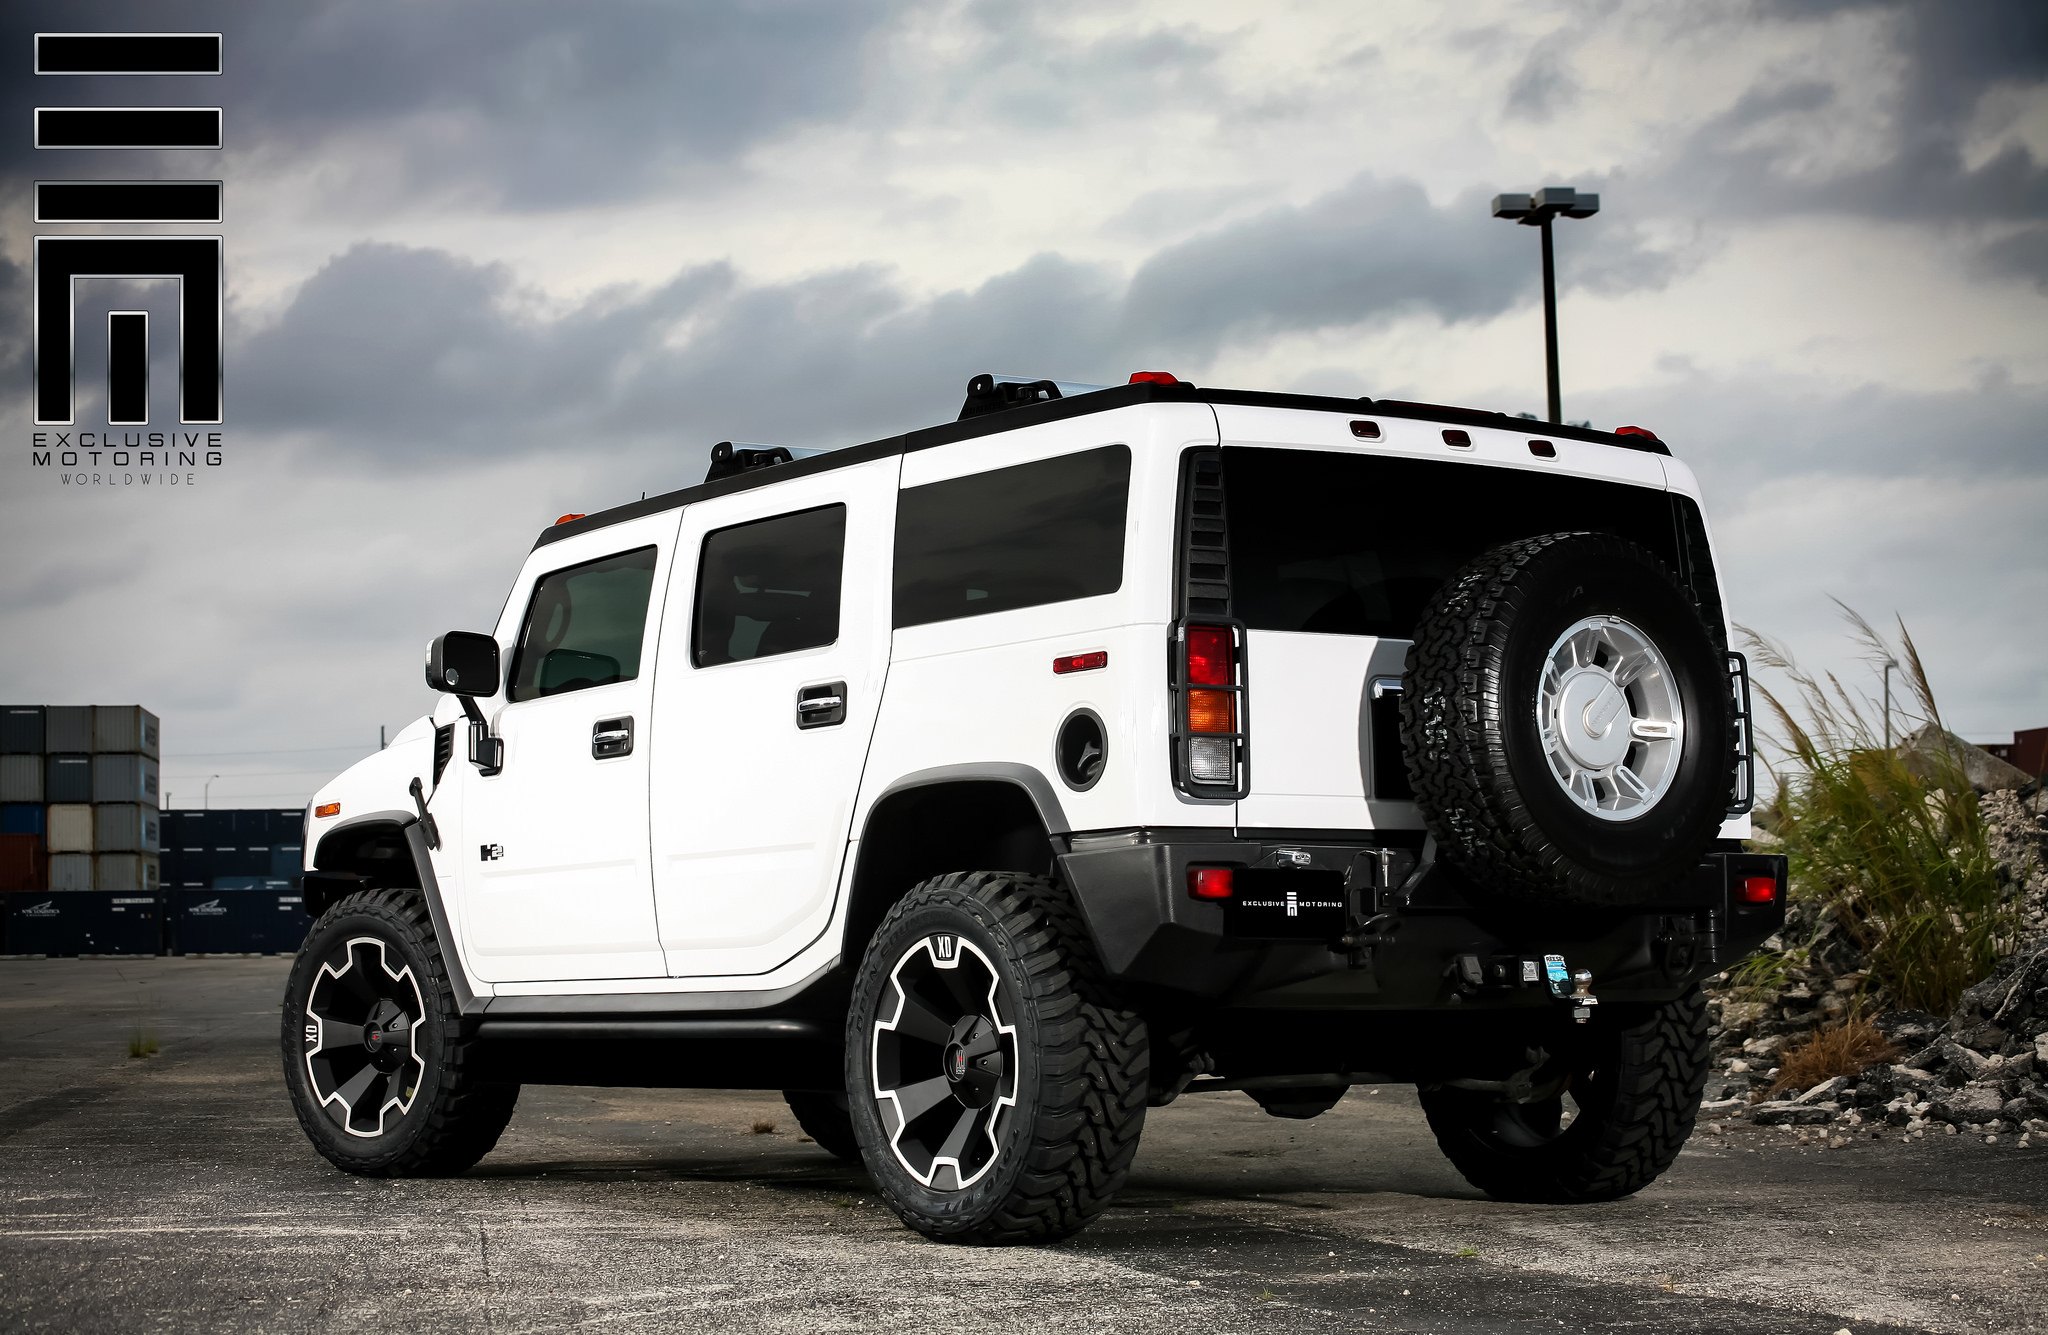 Custom painted XD Off-road Rims on Hummer H2 - Photo by Exclusive Motoring